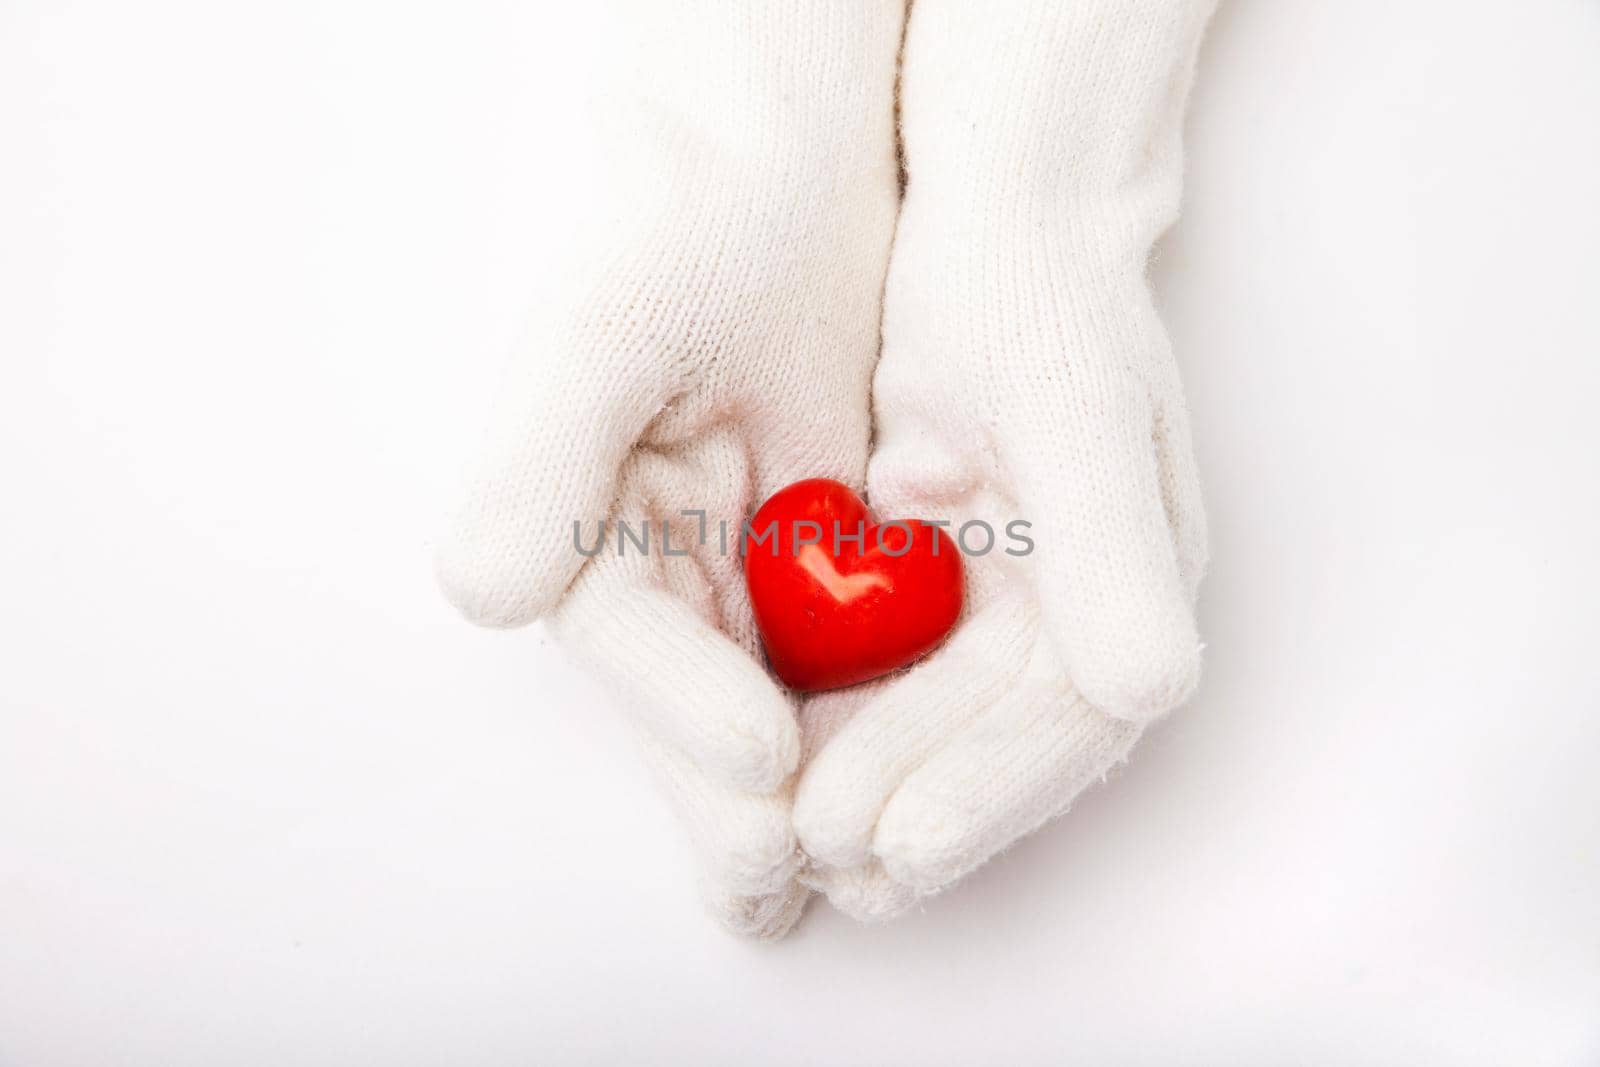 Woman hands in white gloves holding red heart symbol